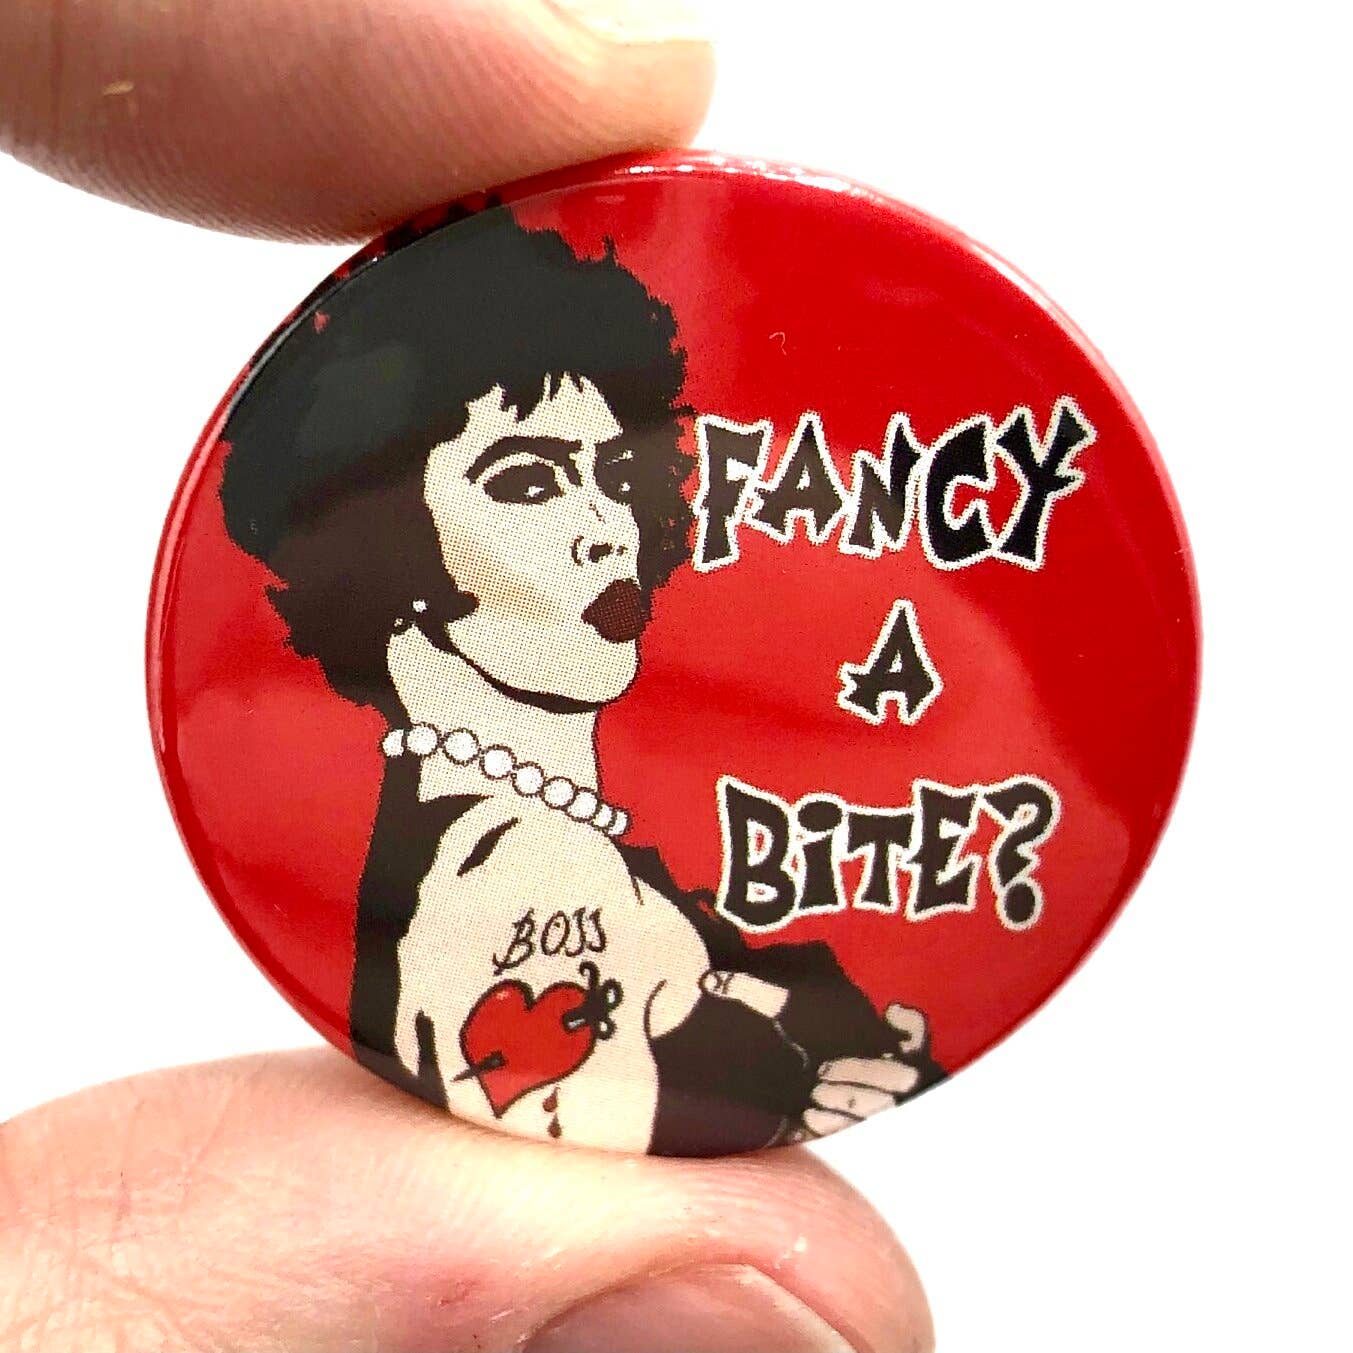 Lot of 6 vintage "The Rocky Horror Picture Show" Pinback Buttons 